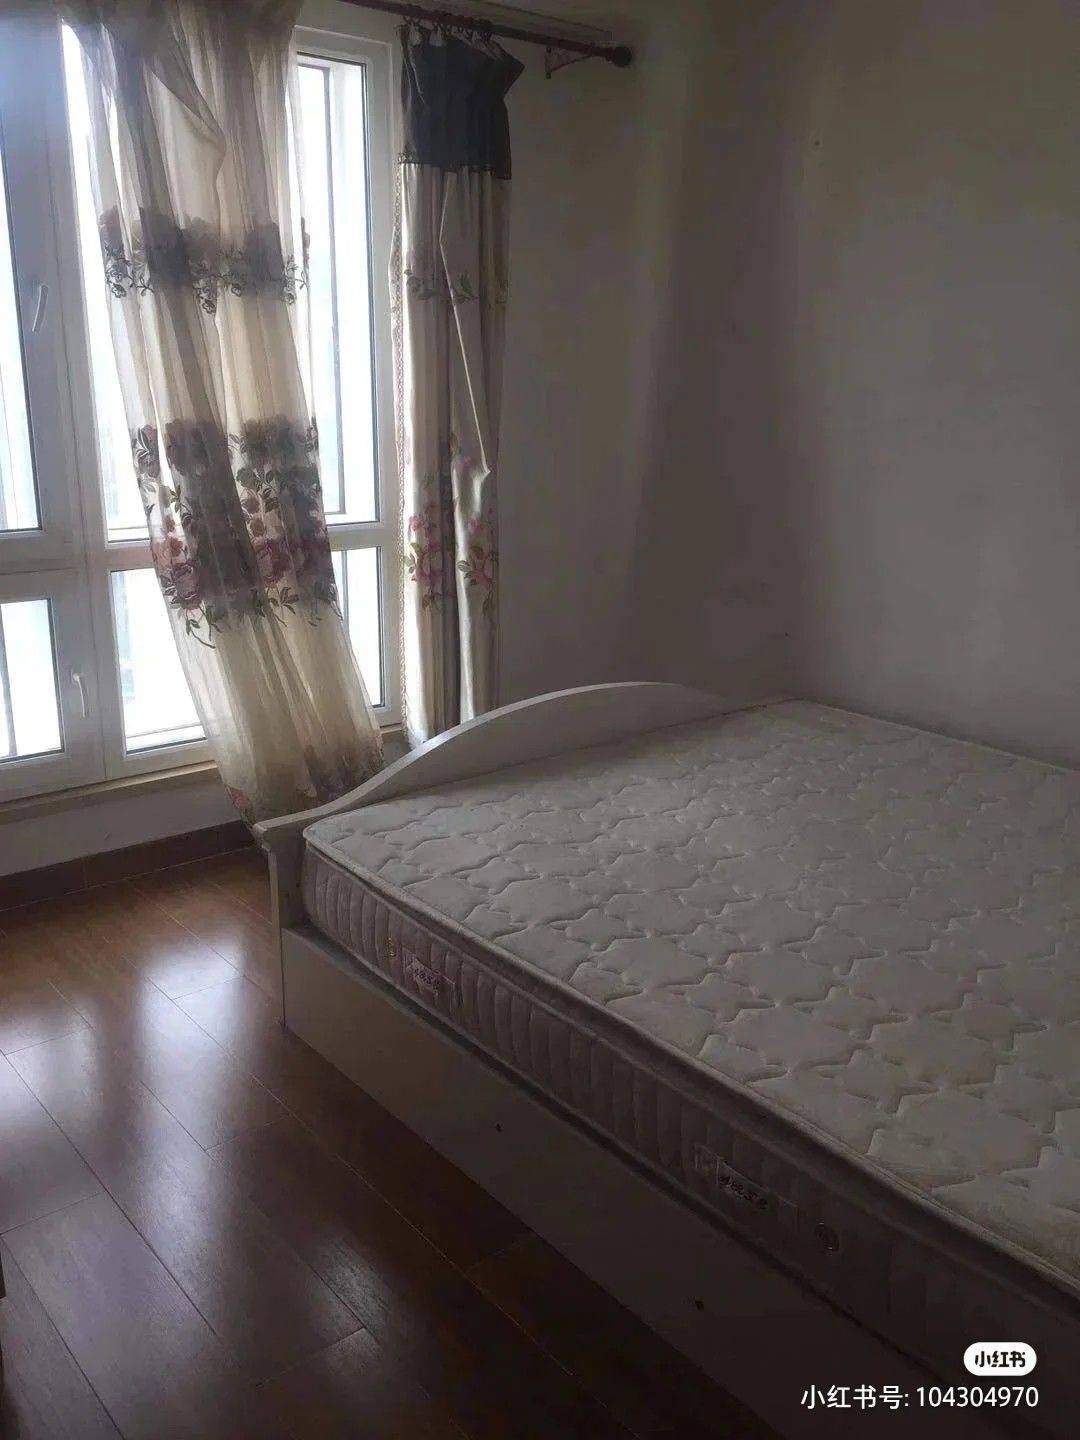 Beijing-Chaoyang-150RMB/Night,高层俯瞰北京,Cozy Home,Clean&Comfy,No Gender Limit,Chilled